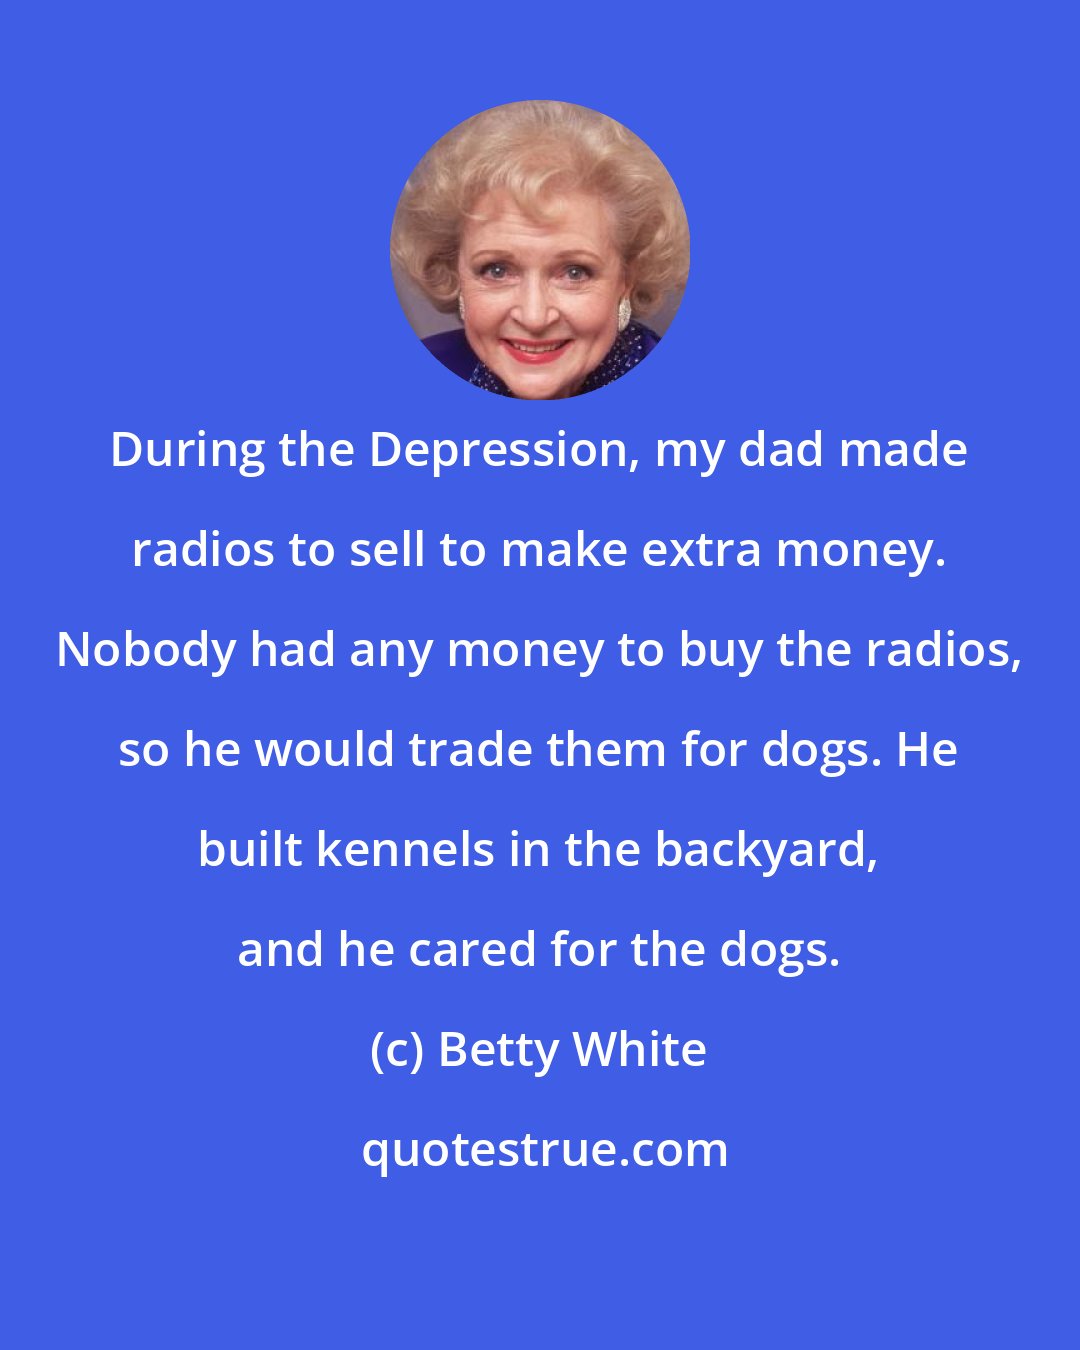 Betty White: During the Depression, my dad made radios to sell to make extra money. Nobody had any money to buy the radios, so he would trade them for dogs. He built kennels in the backyard, and he cared for the dogs.